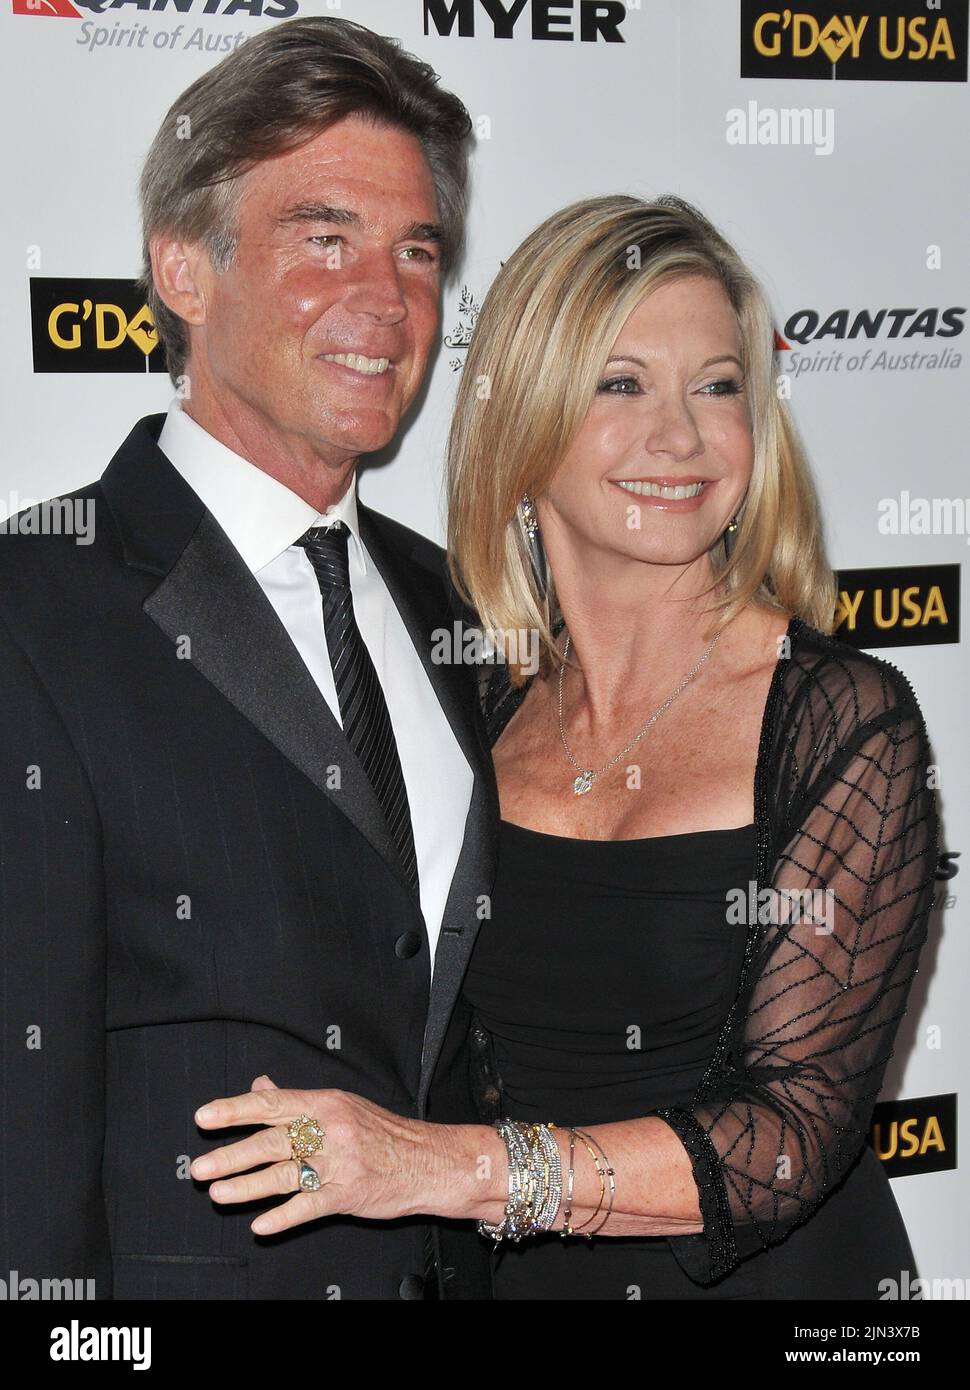 FILE PICS: Olivia Newton-John 1948-2022. Hollywood, USA. 23rd Jan, 2011. John Easterling & Olivia Newton John at the 2011 G'Day USA Los Angeles Black Tie Gala held at The Hollywood Palladium in Hollywood, CA. The event took place on Saturday, January 22, 2011. Photo by PRPP/ PictureLux Credit: PictureLux/The Hollywood Archive/Alamy Live News Credit: PictureLux / The Hollywood Archive/Alamy Live News Stock Photo